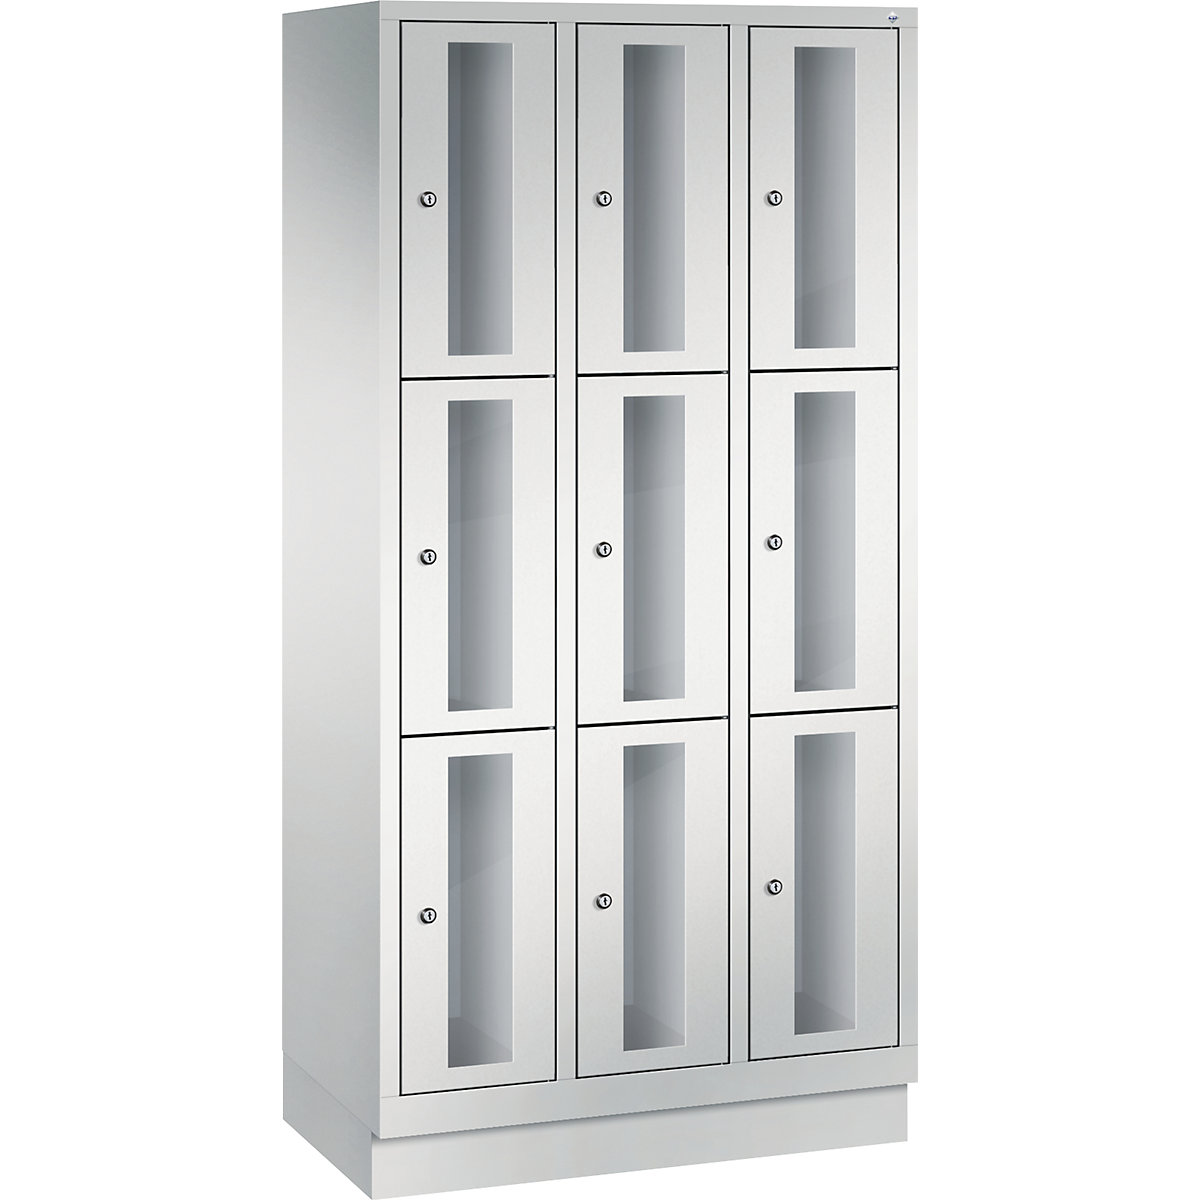 C+P – CLASSIC locker unit, compartment height 510 mm, with plinth, 9 compartments, width 900 mm, light grey door